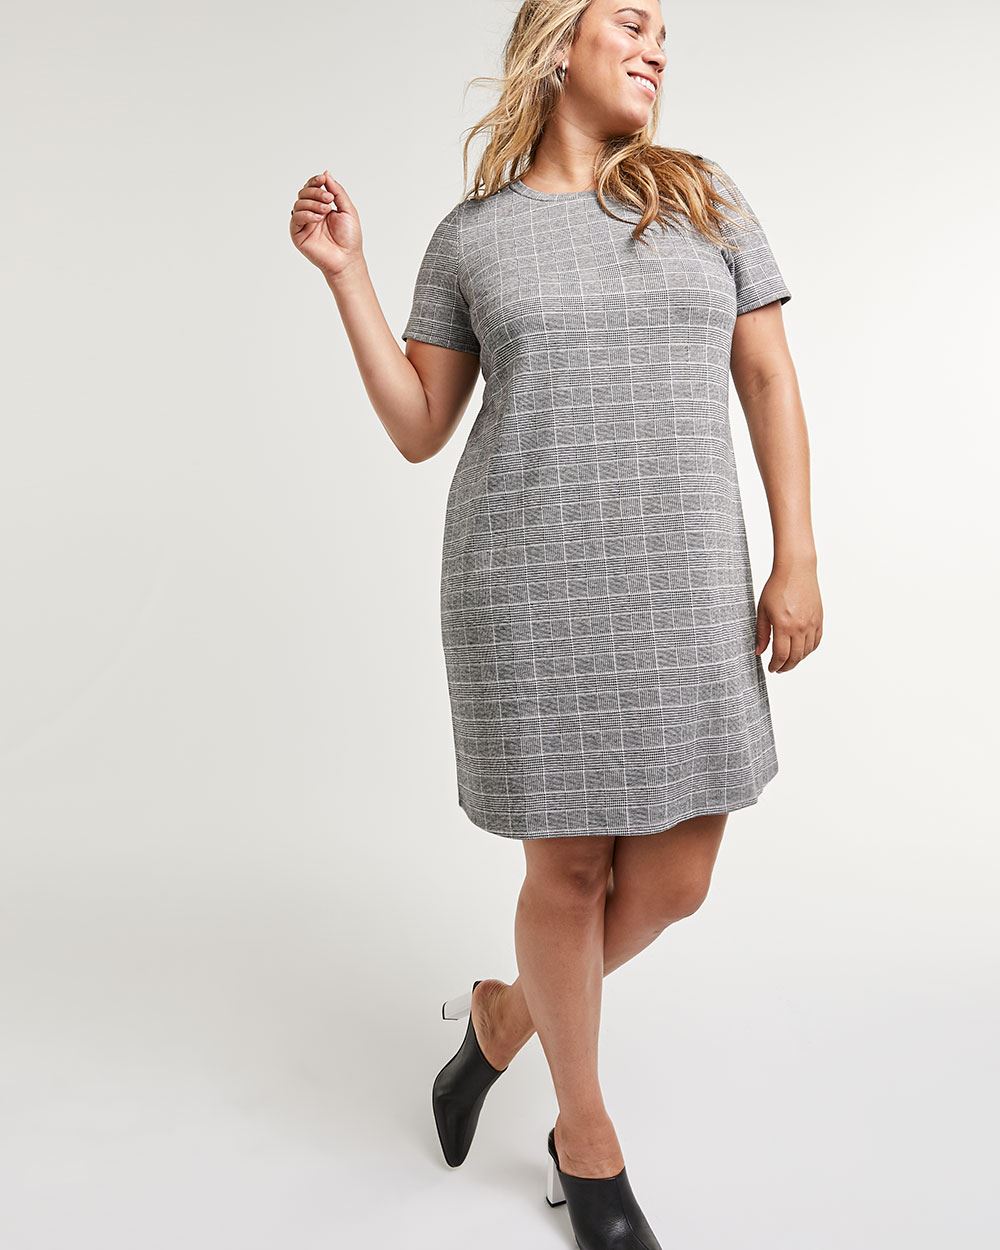 shift dress with buttons